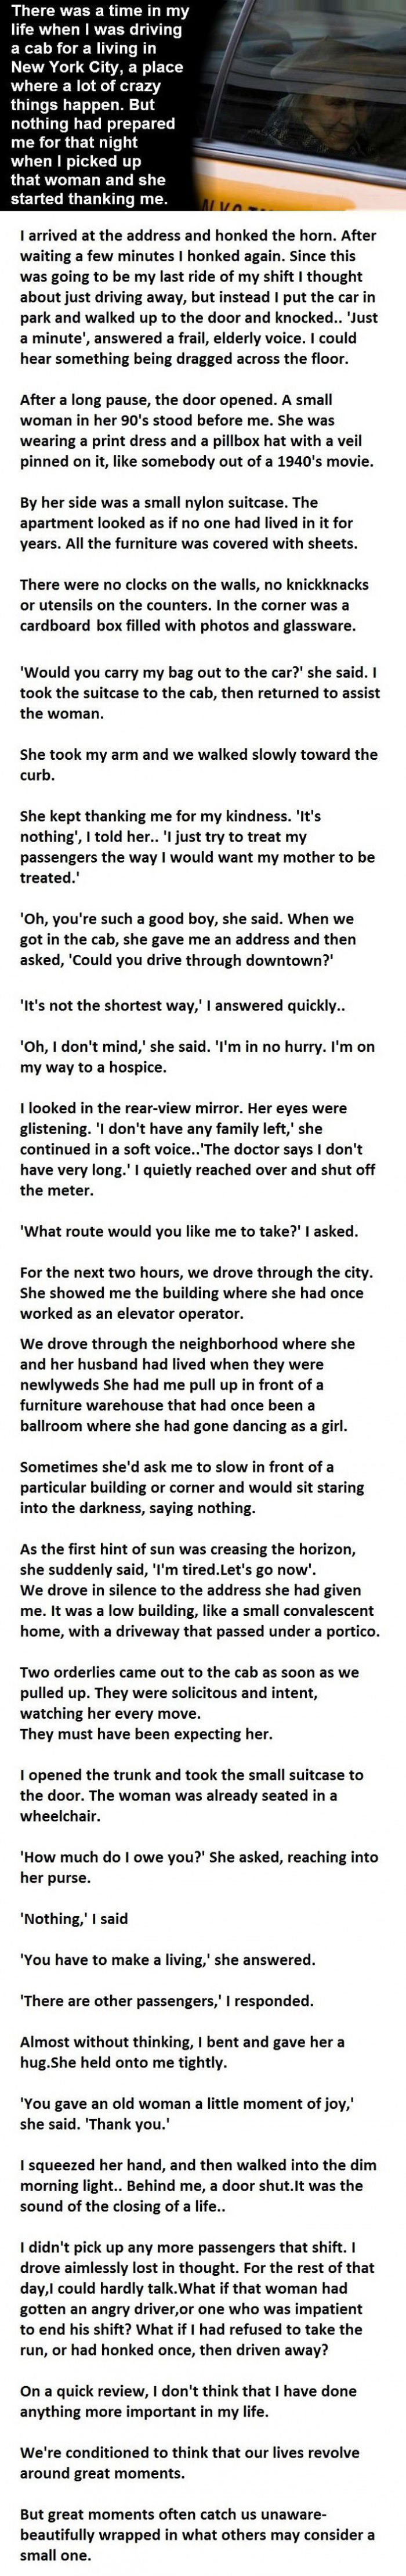 one of the most raw stories about life and its precious moments, you will tear up for sure